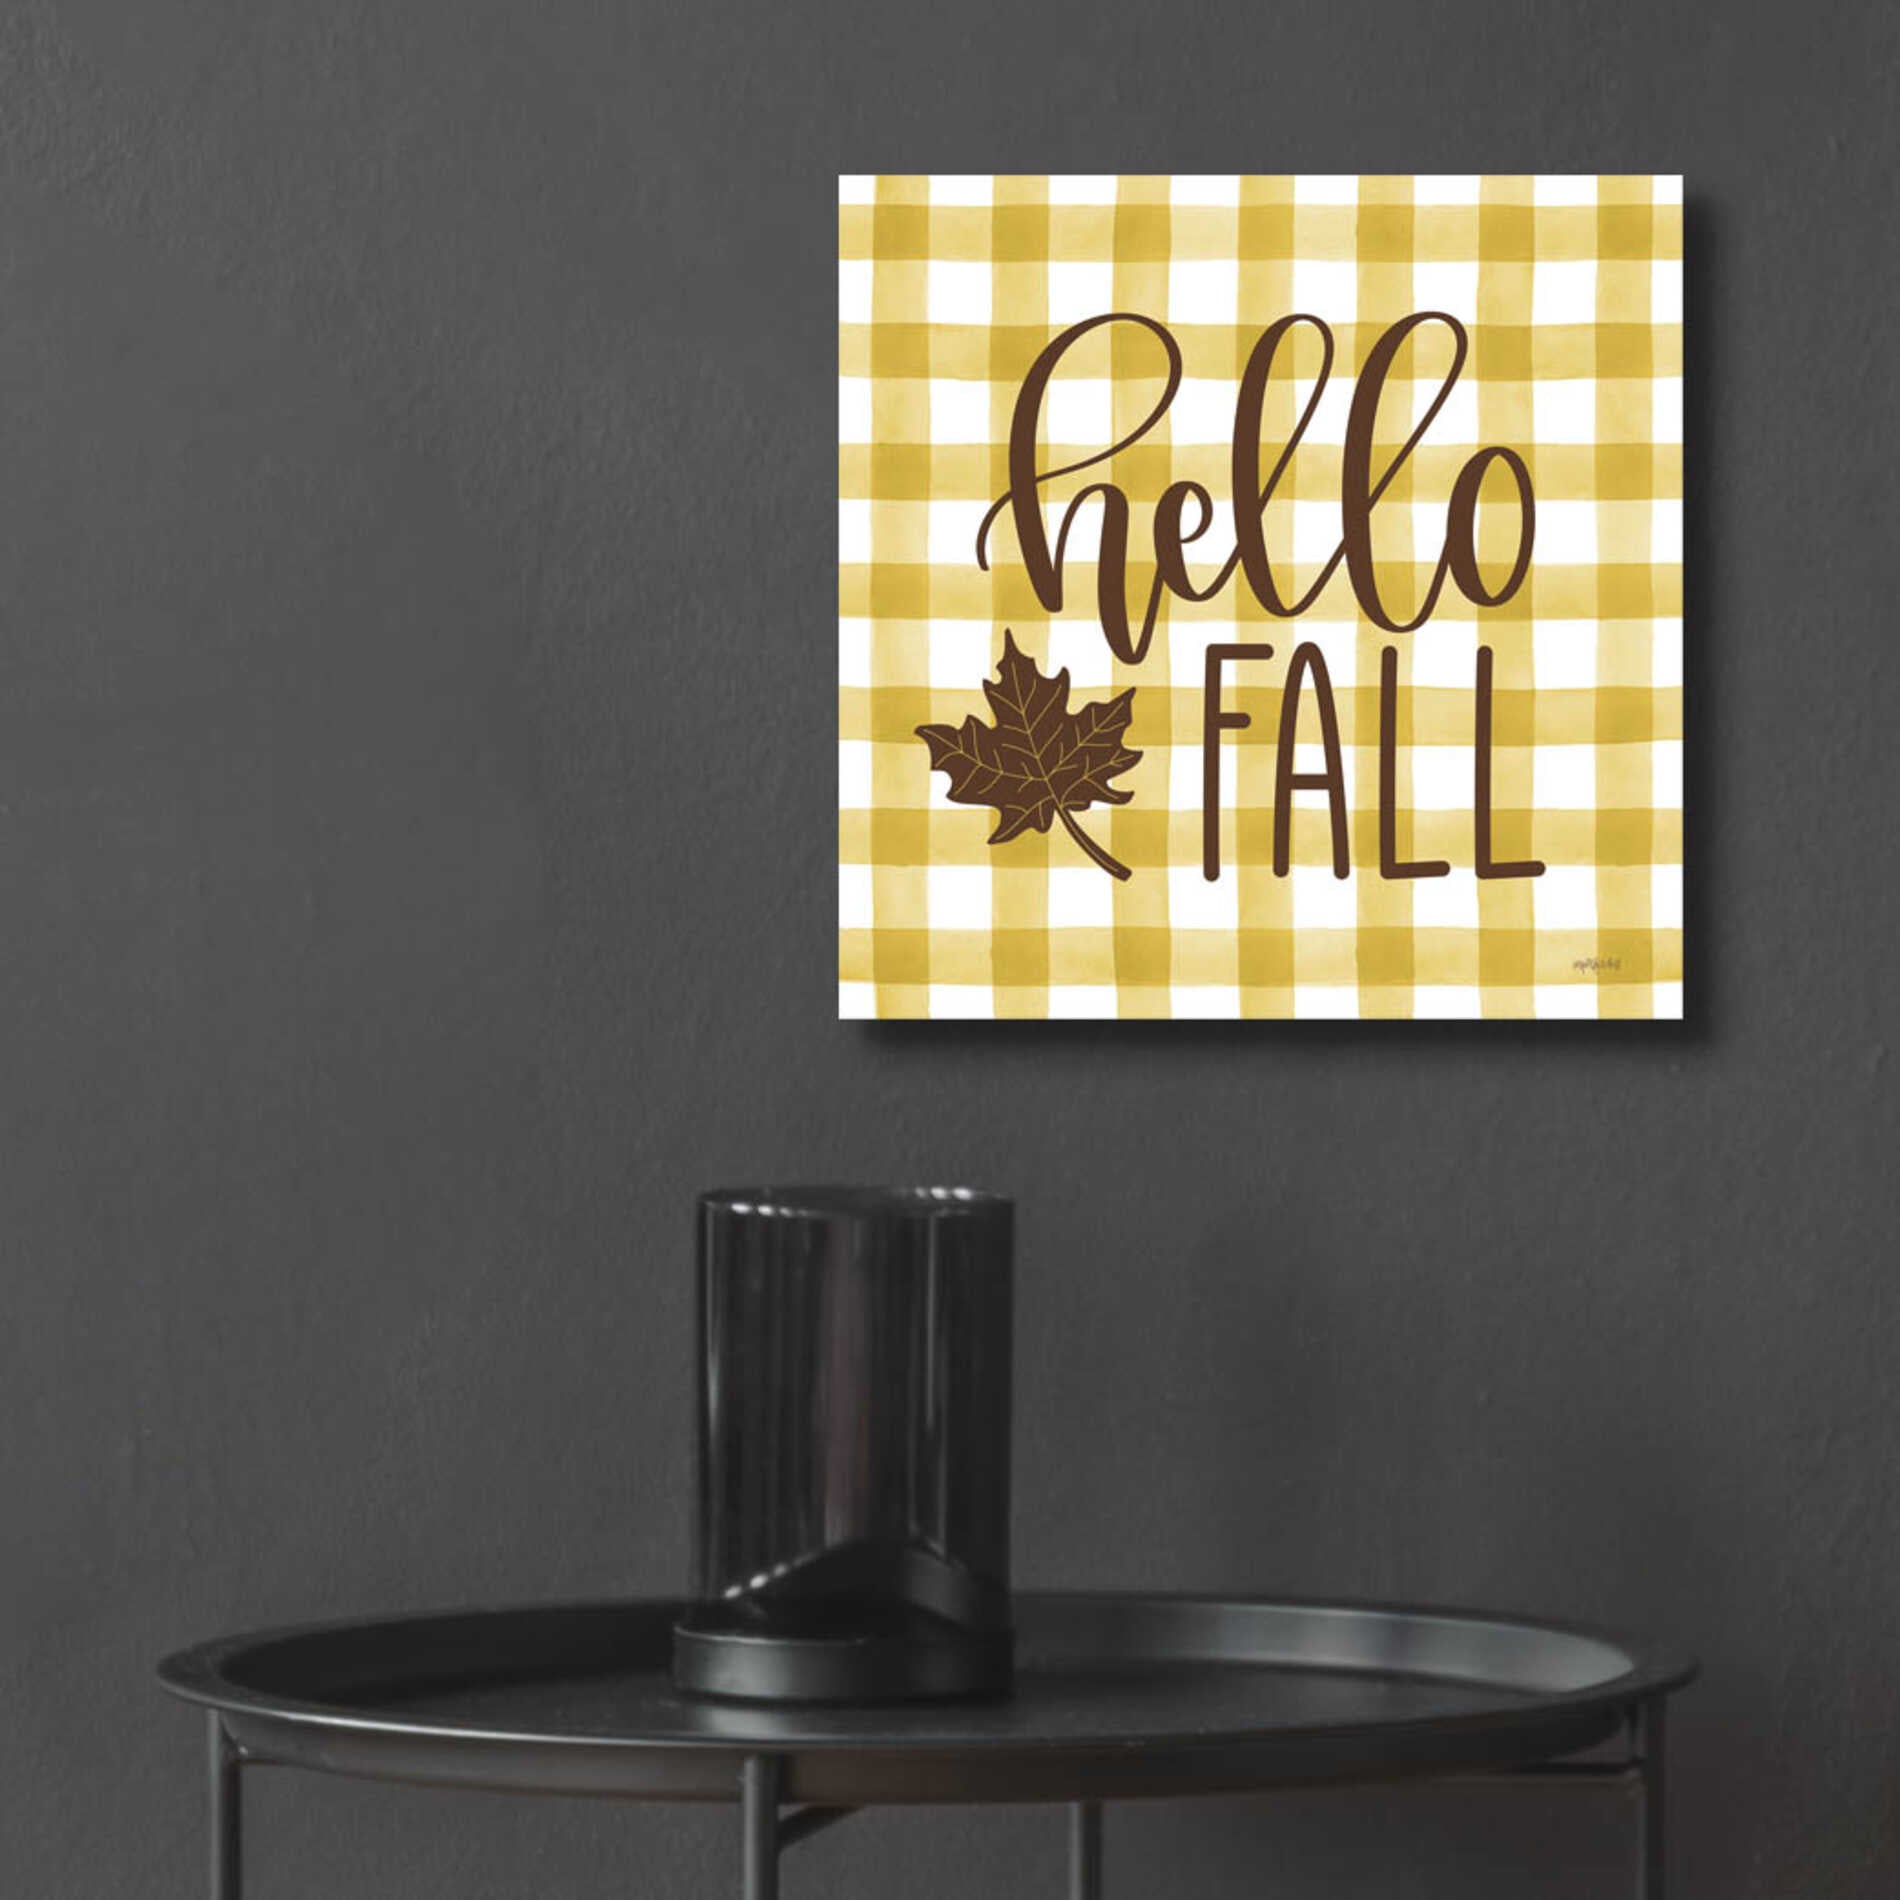 Epic Art 'Hello Fall' by Imperfect Dust, Acrylic Glass Wall Art,12x12